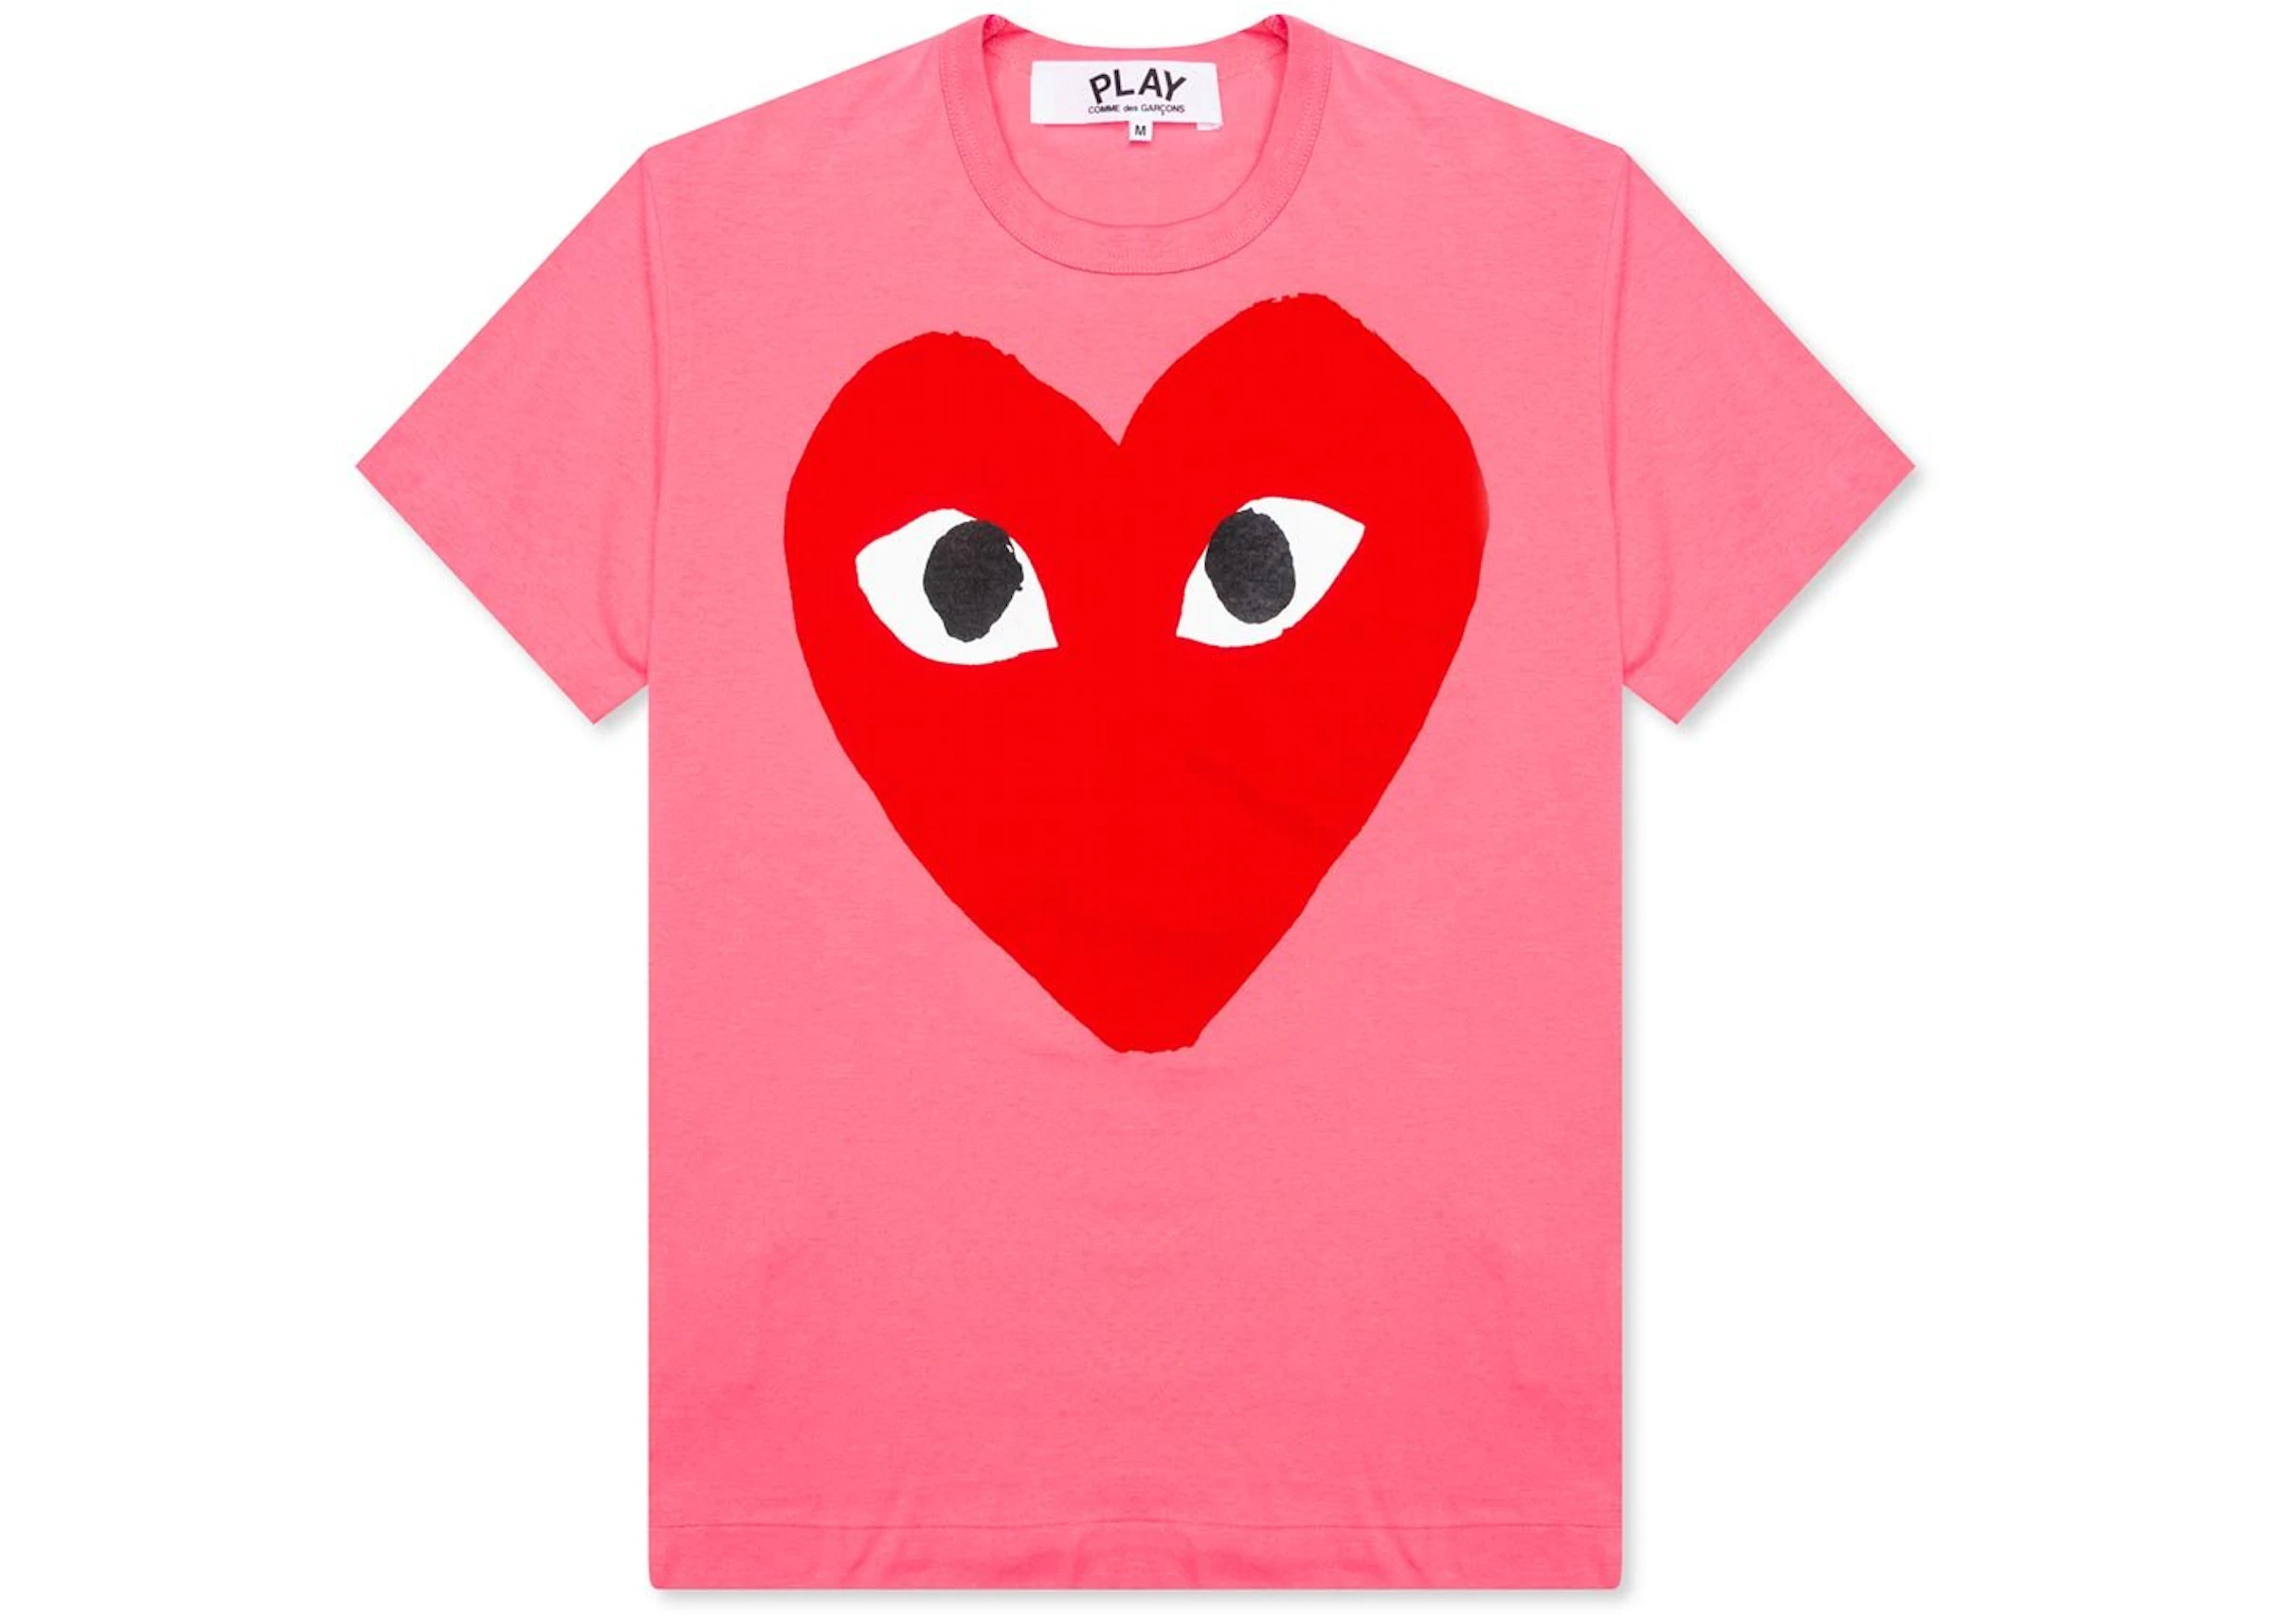 CDG Play Pastelle Red Heart T-shirt Pink | lupon.gov.ph